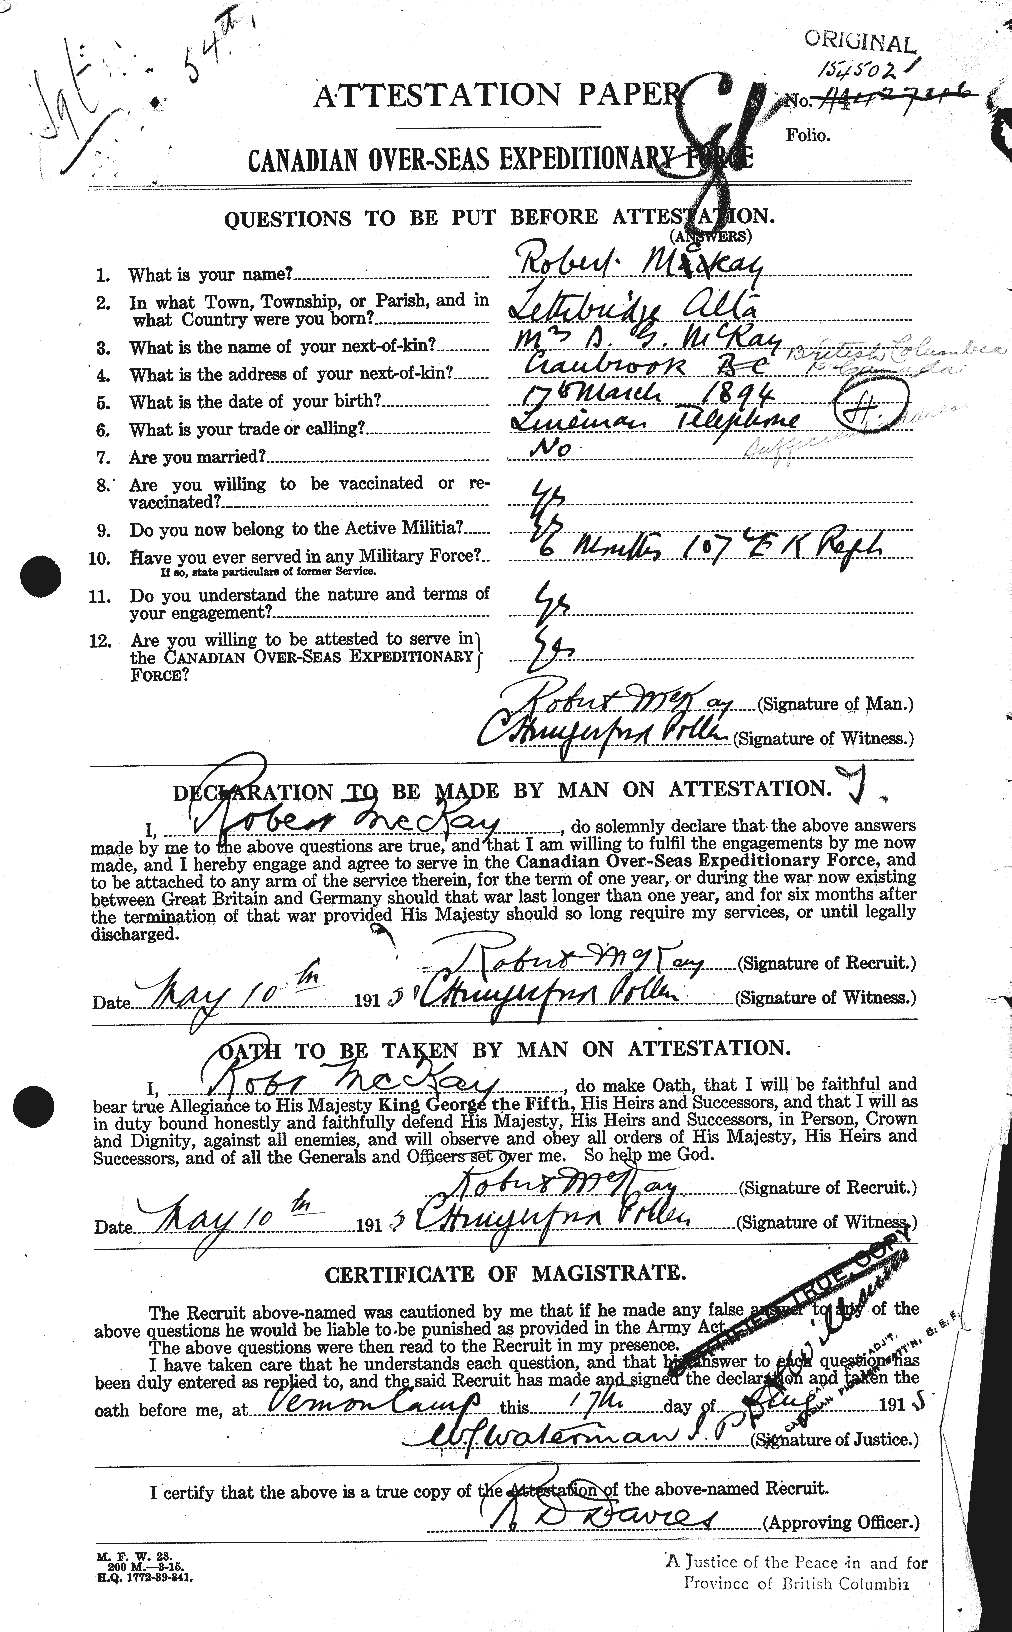 Personnel Records of the First World War - CEF 530067a